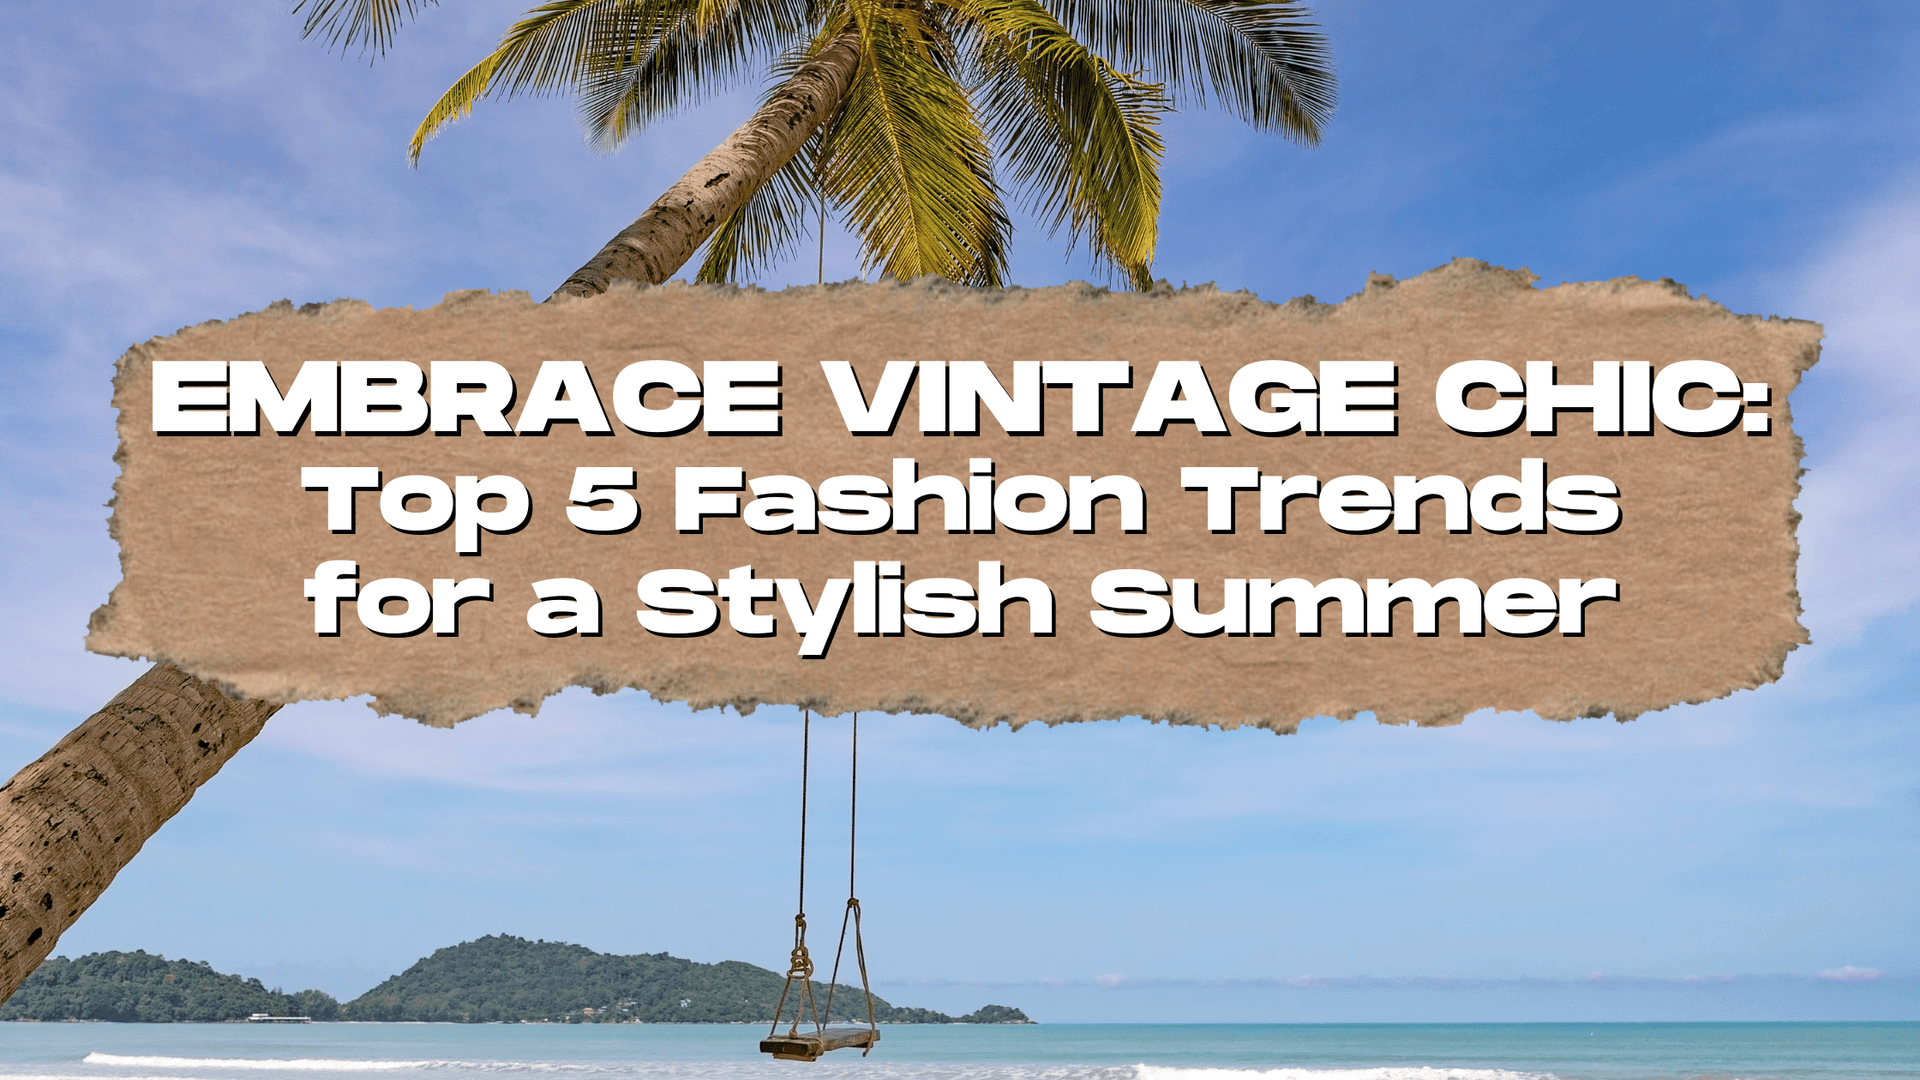 Embrace Vintage Chic: Top 5 Fashion Trends for a Stylish Summer with Thrift Vintage Fashion